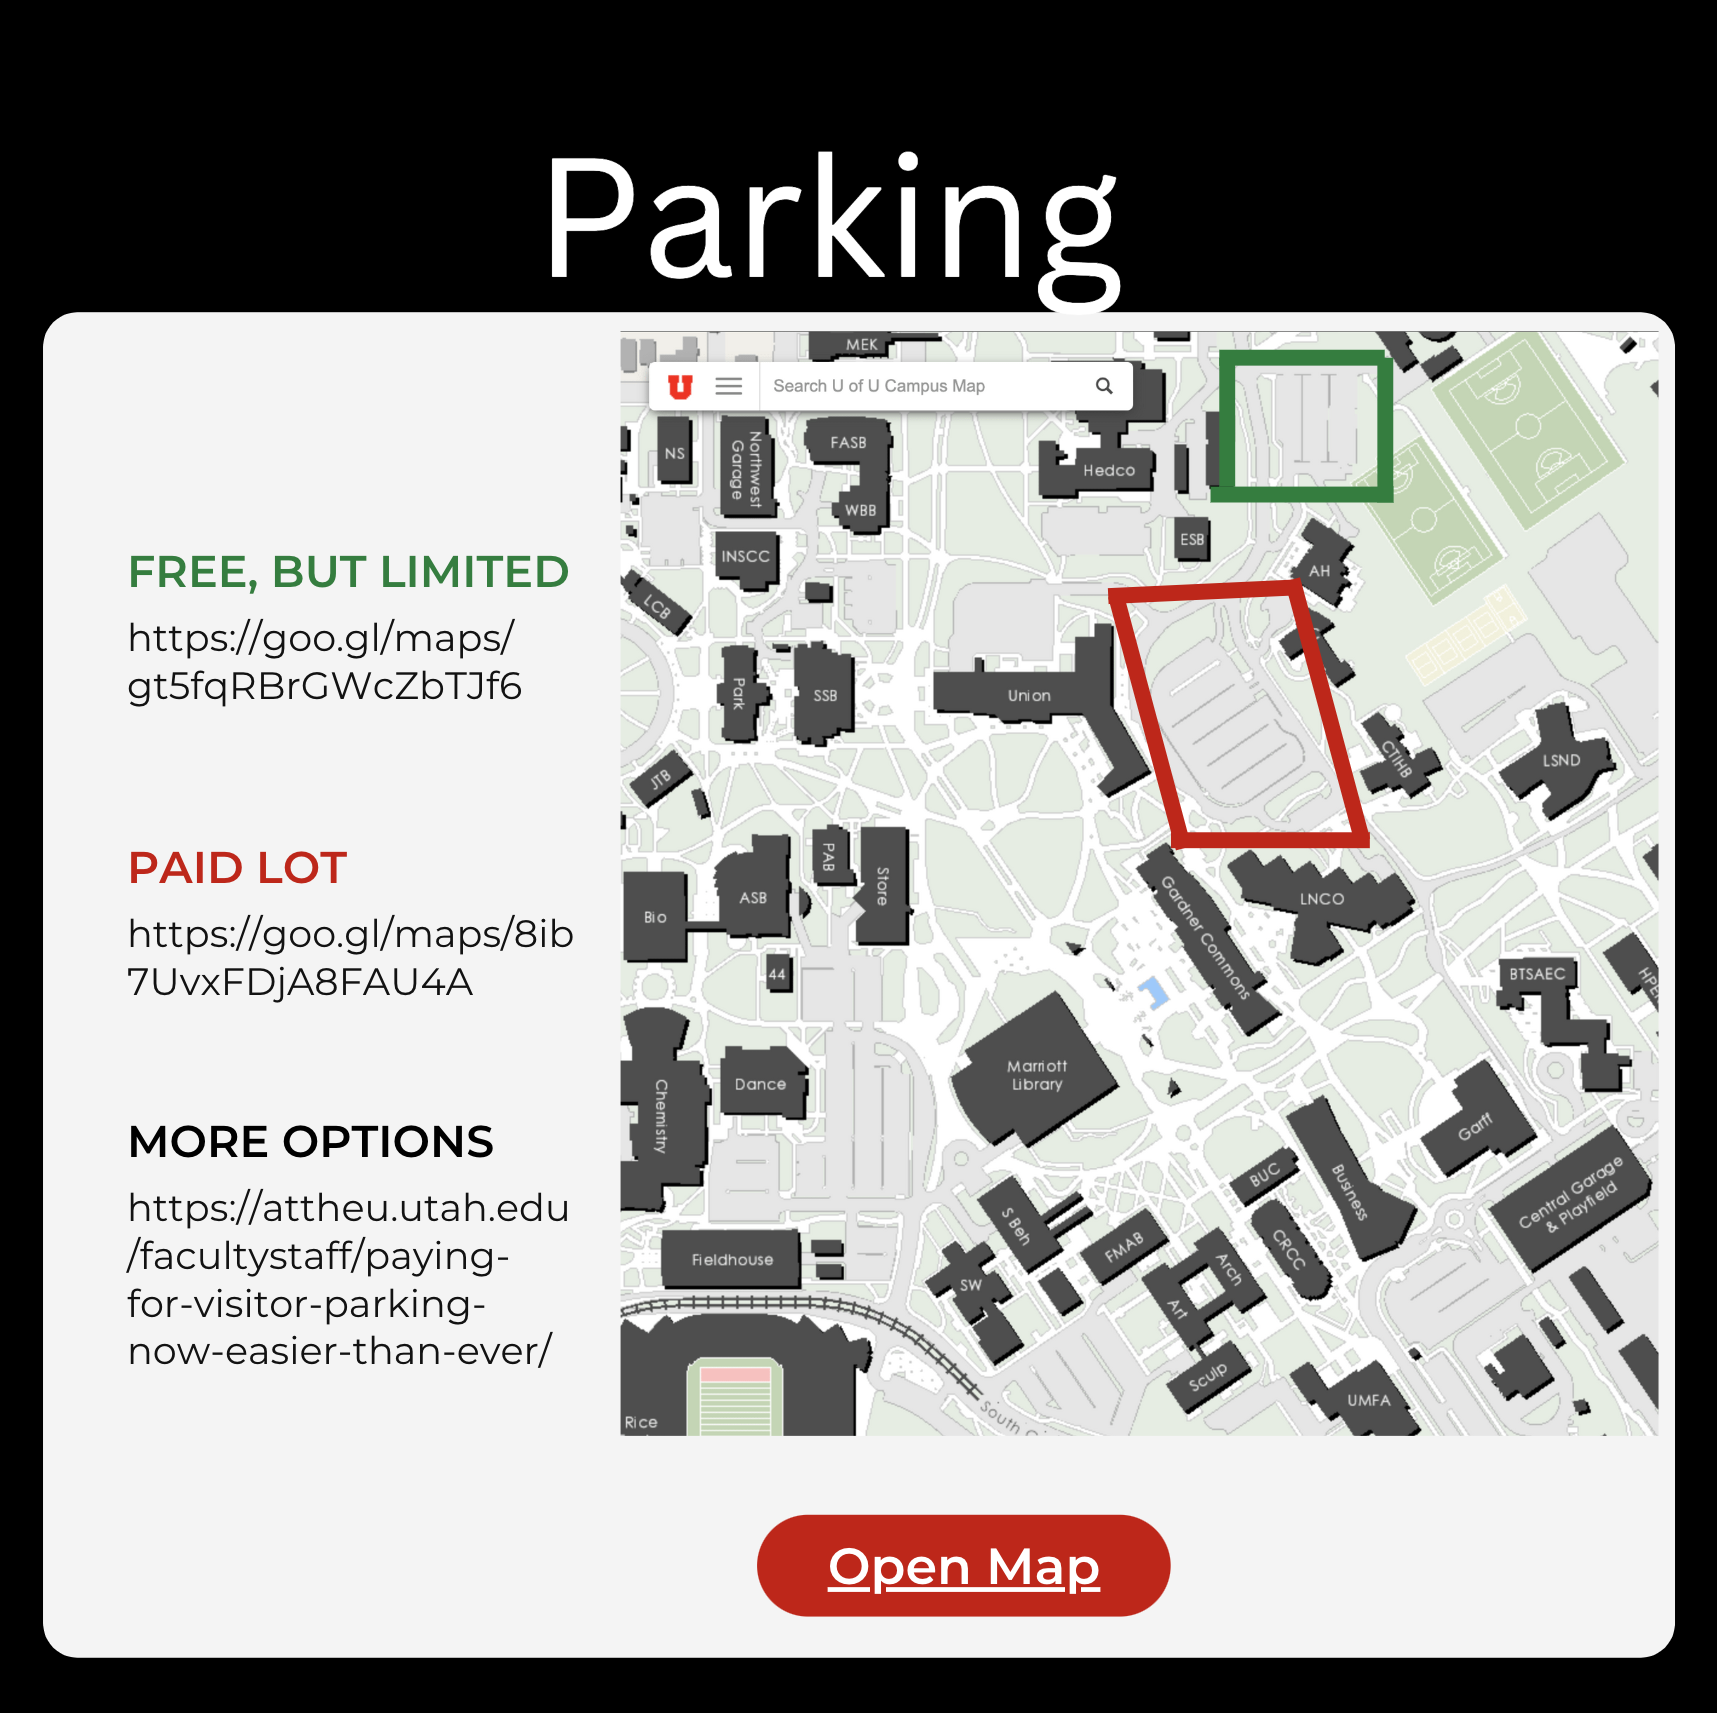 Free, But Limited https://goo.gl/maps/gt5fqRBrGWcZbTJf6 Paid lot https://goo.gl/maps/8ib7UvxFDjA8FAU4A More Options https://attheu.utah.edu/facultystaff/paying-for-visitor-parking-now-easier-than-ever/